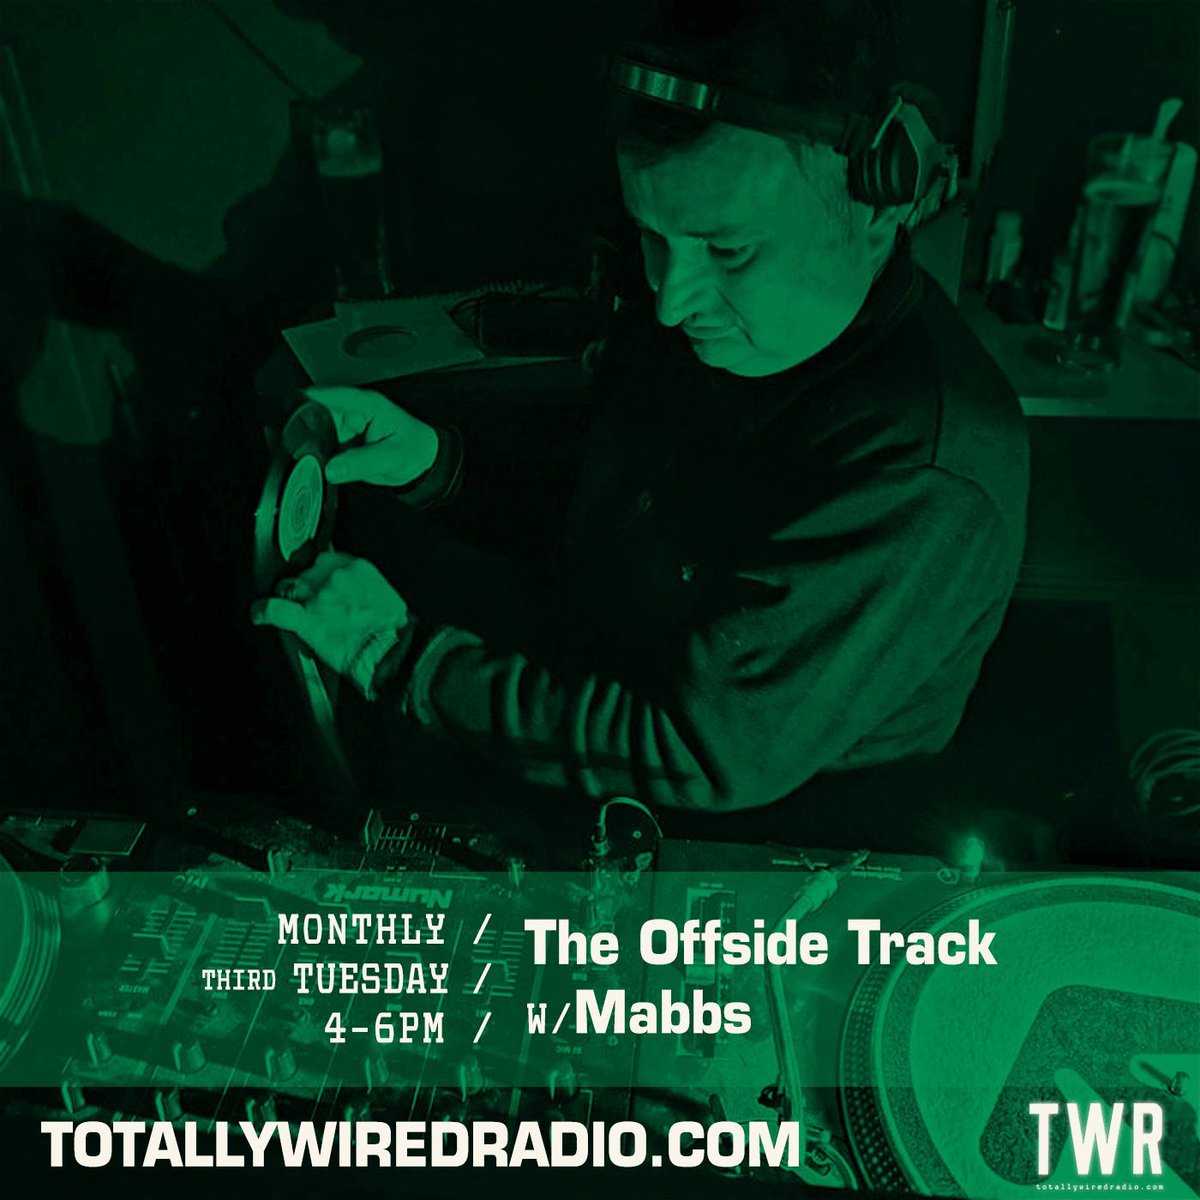 The Offside Track w/ Mabbs #startingsoon on #TotallyWiredRadio Listen @ Link in bio. - #MusicIsLife #London - #Soul #HipHop #Reggae #Electronic #Interview